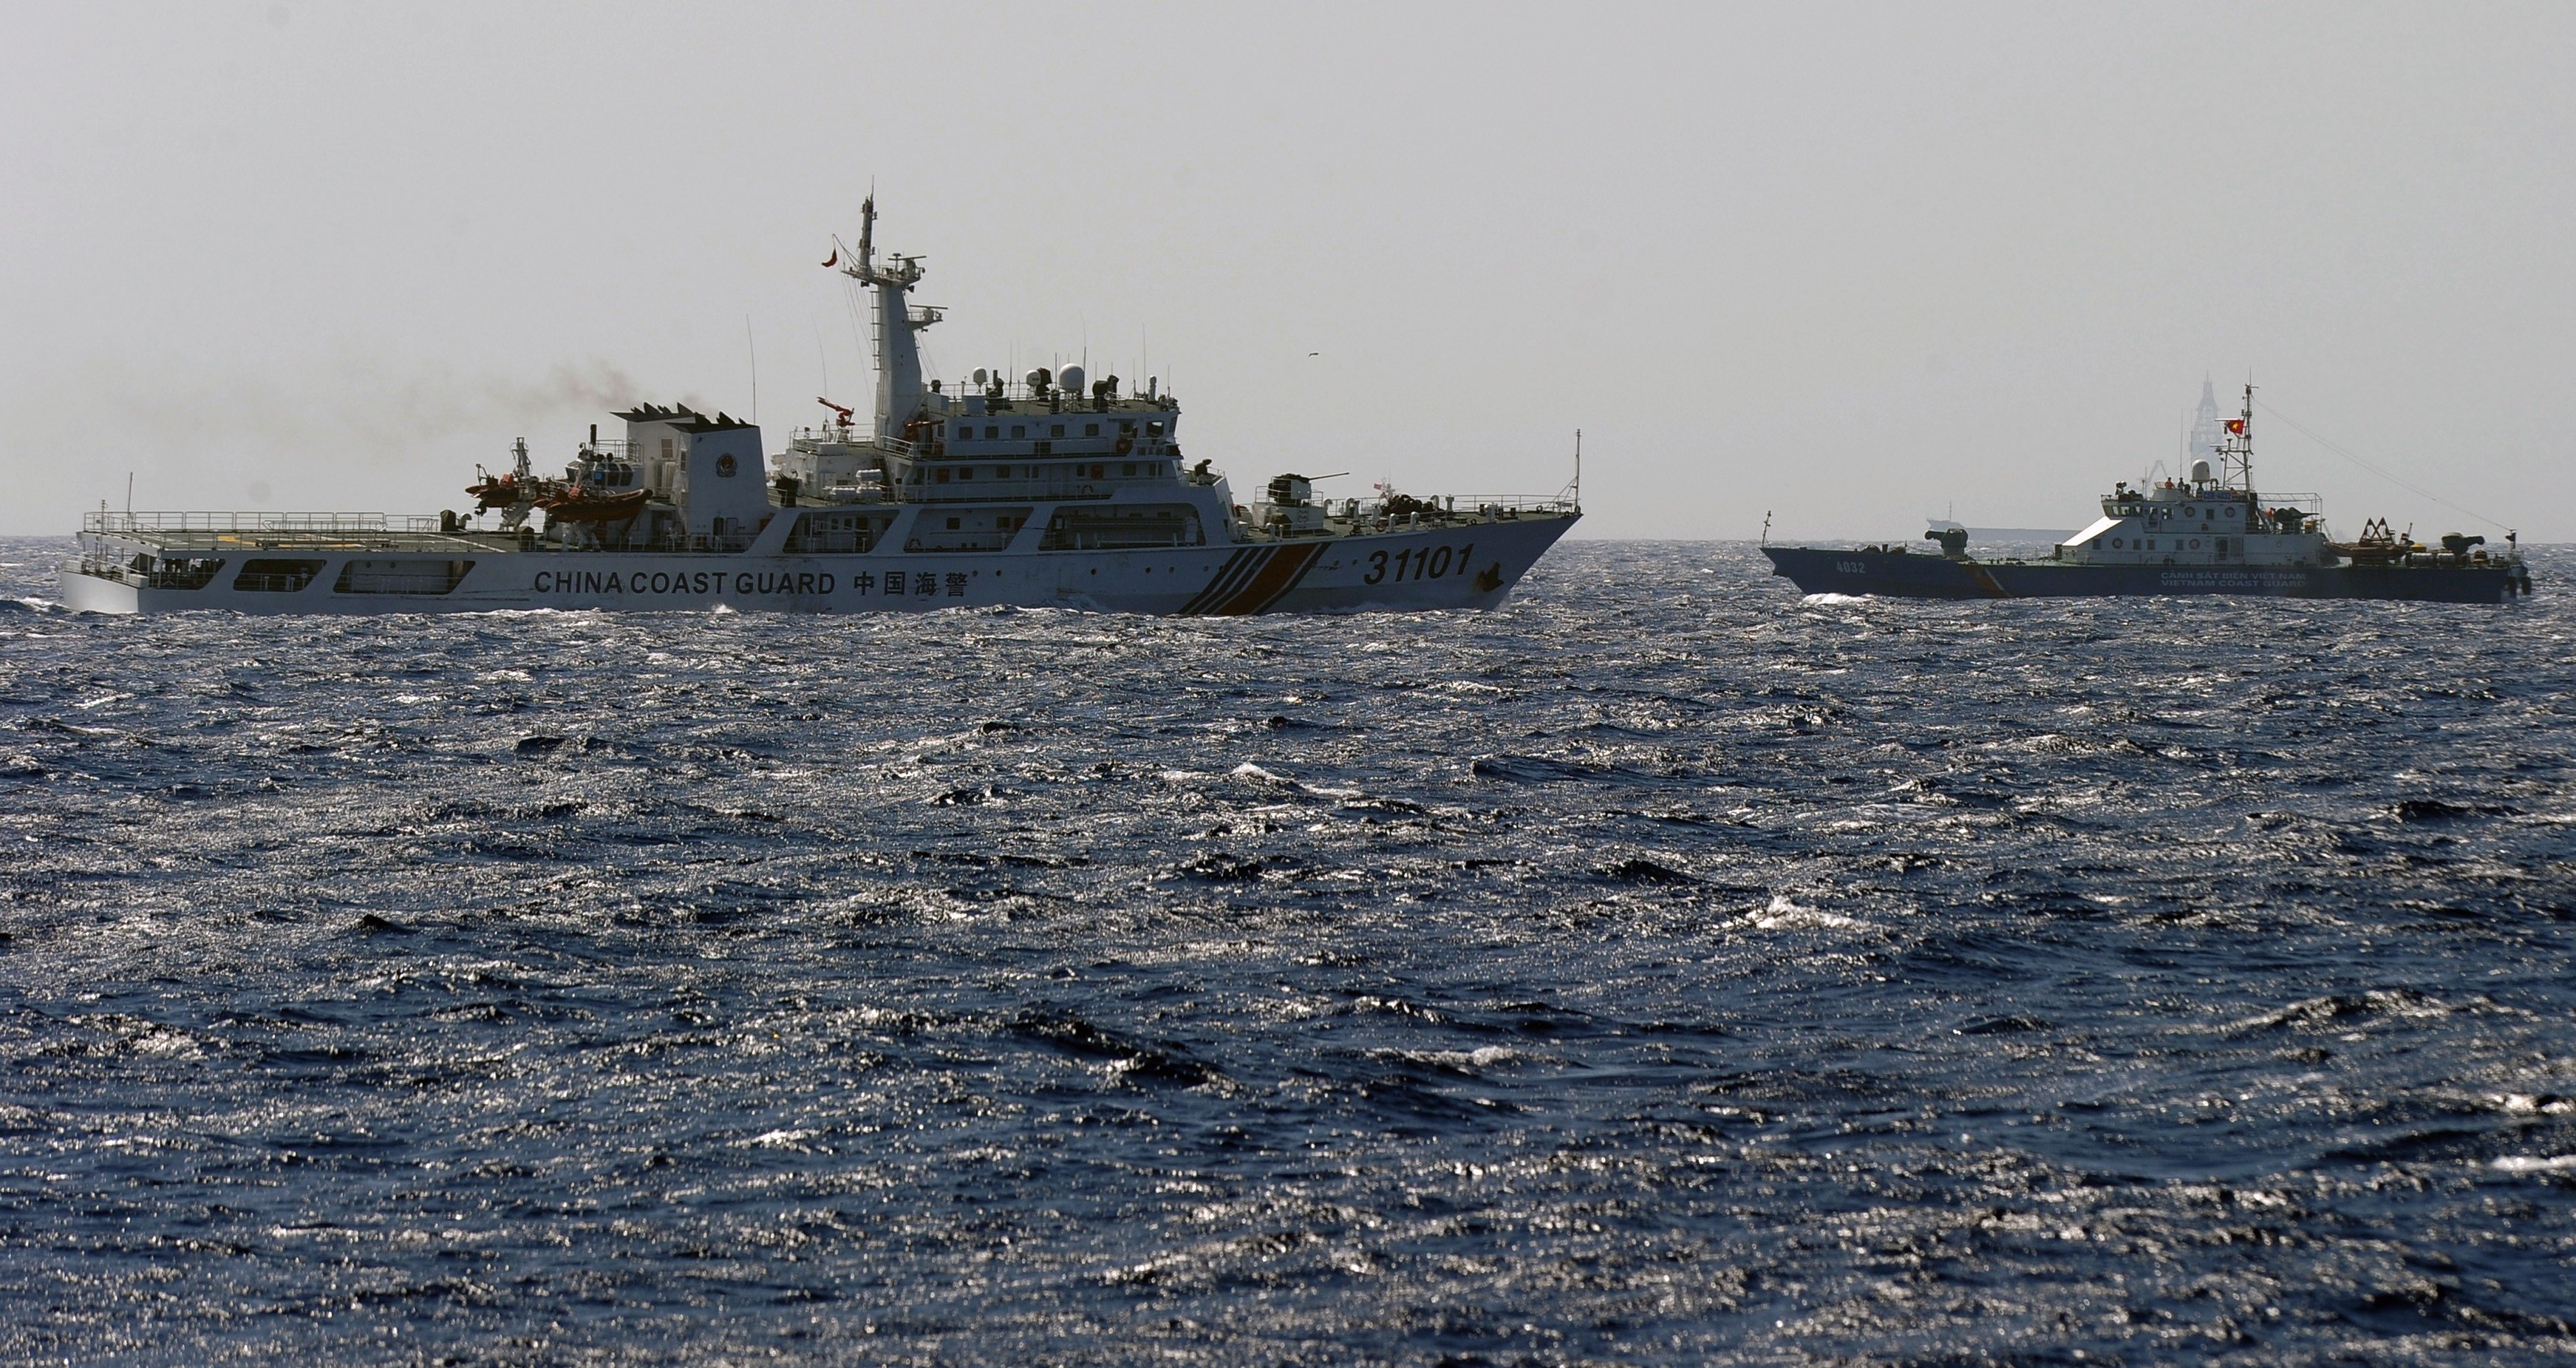 This picture taken on May 14, 2014 shows a China Coast Guard ship (L) chasing a Vietnam Coast Guard vessel near the site of a Chinese drilling oil rig in disputed waters in the South China Sea. (Hoang Dinh Nam—AFP/Getty Images)